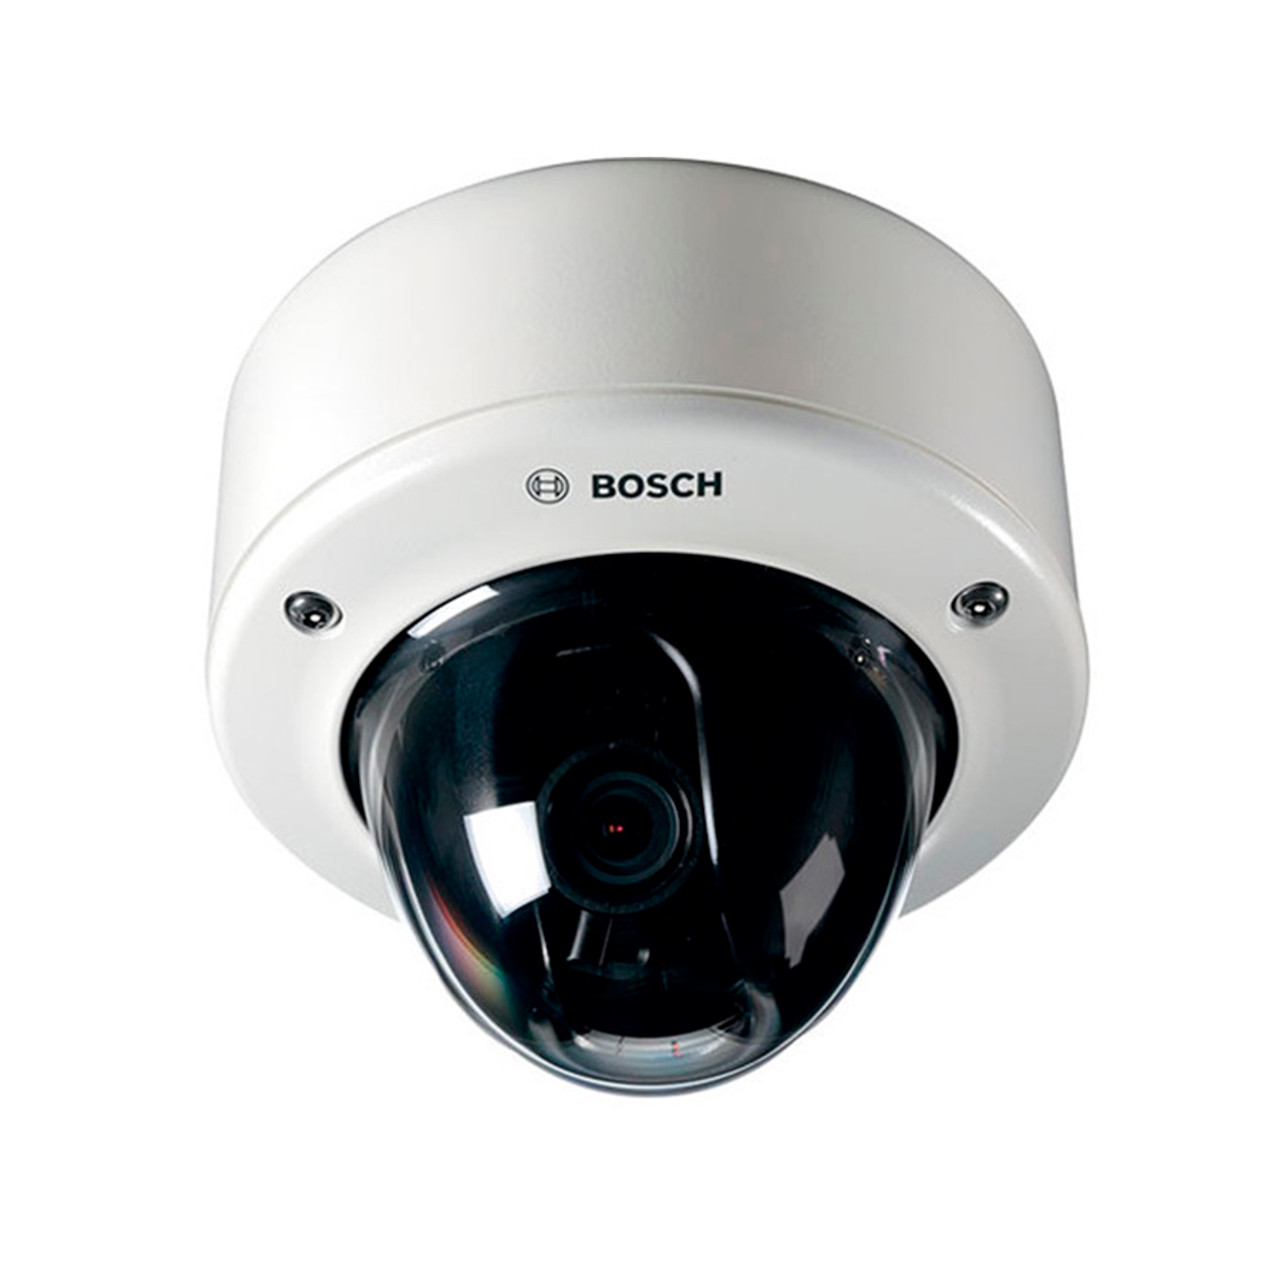 Bosch NIN-63013-A3S 720p FLEXIDOME IP Starlight 6000 VR Dome Hybrid  IP/Analog Security Camera with Surface Mount